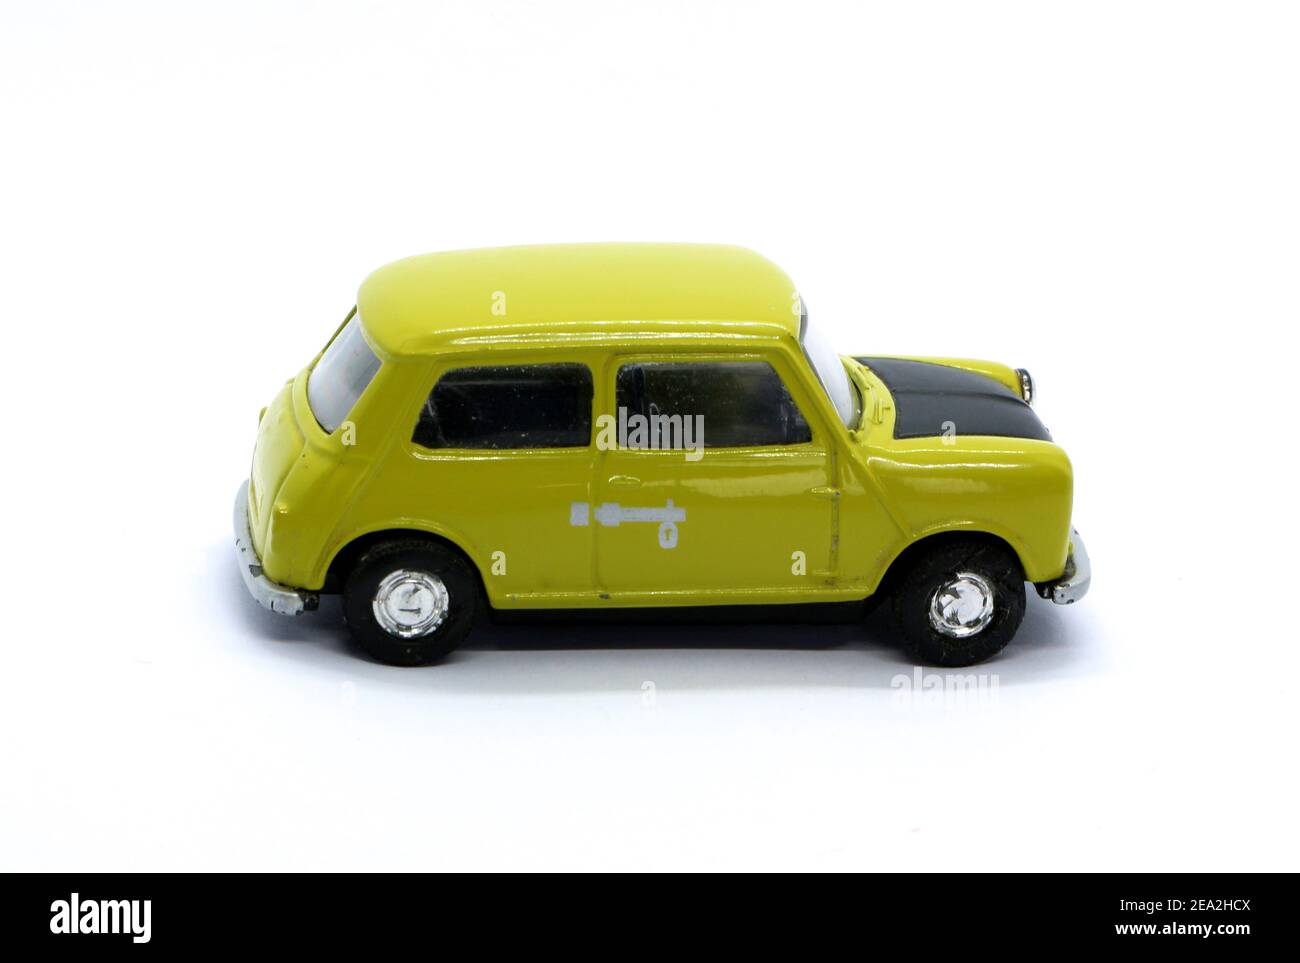 Photo of a Corgi die cast model of the green and black Mini car used in the Mr Bean tv series and films Stock Photo